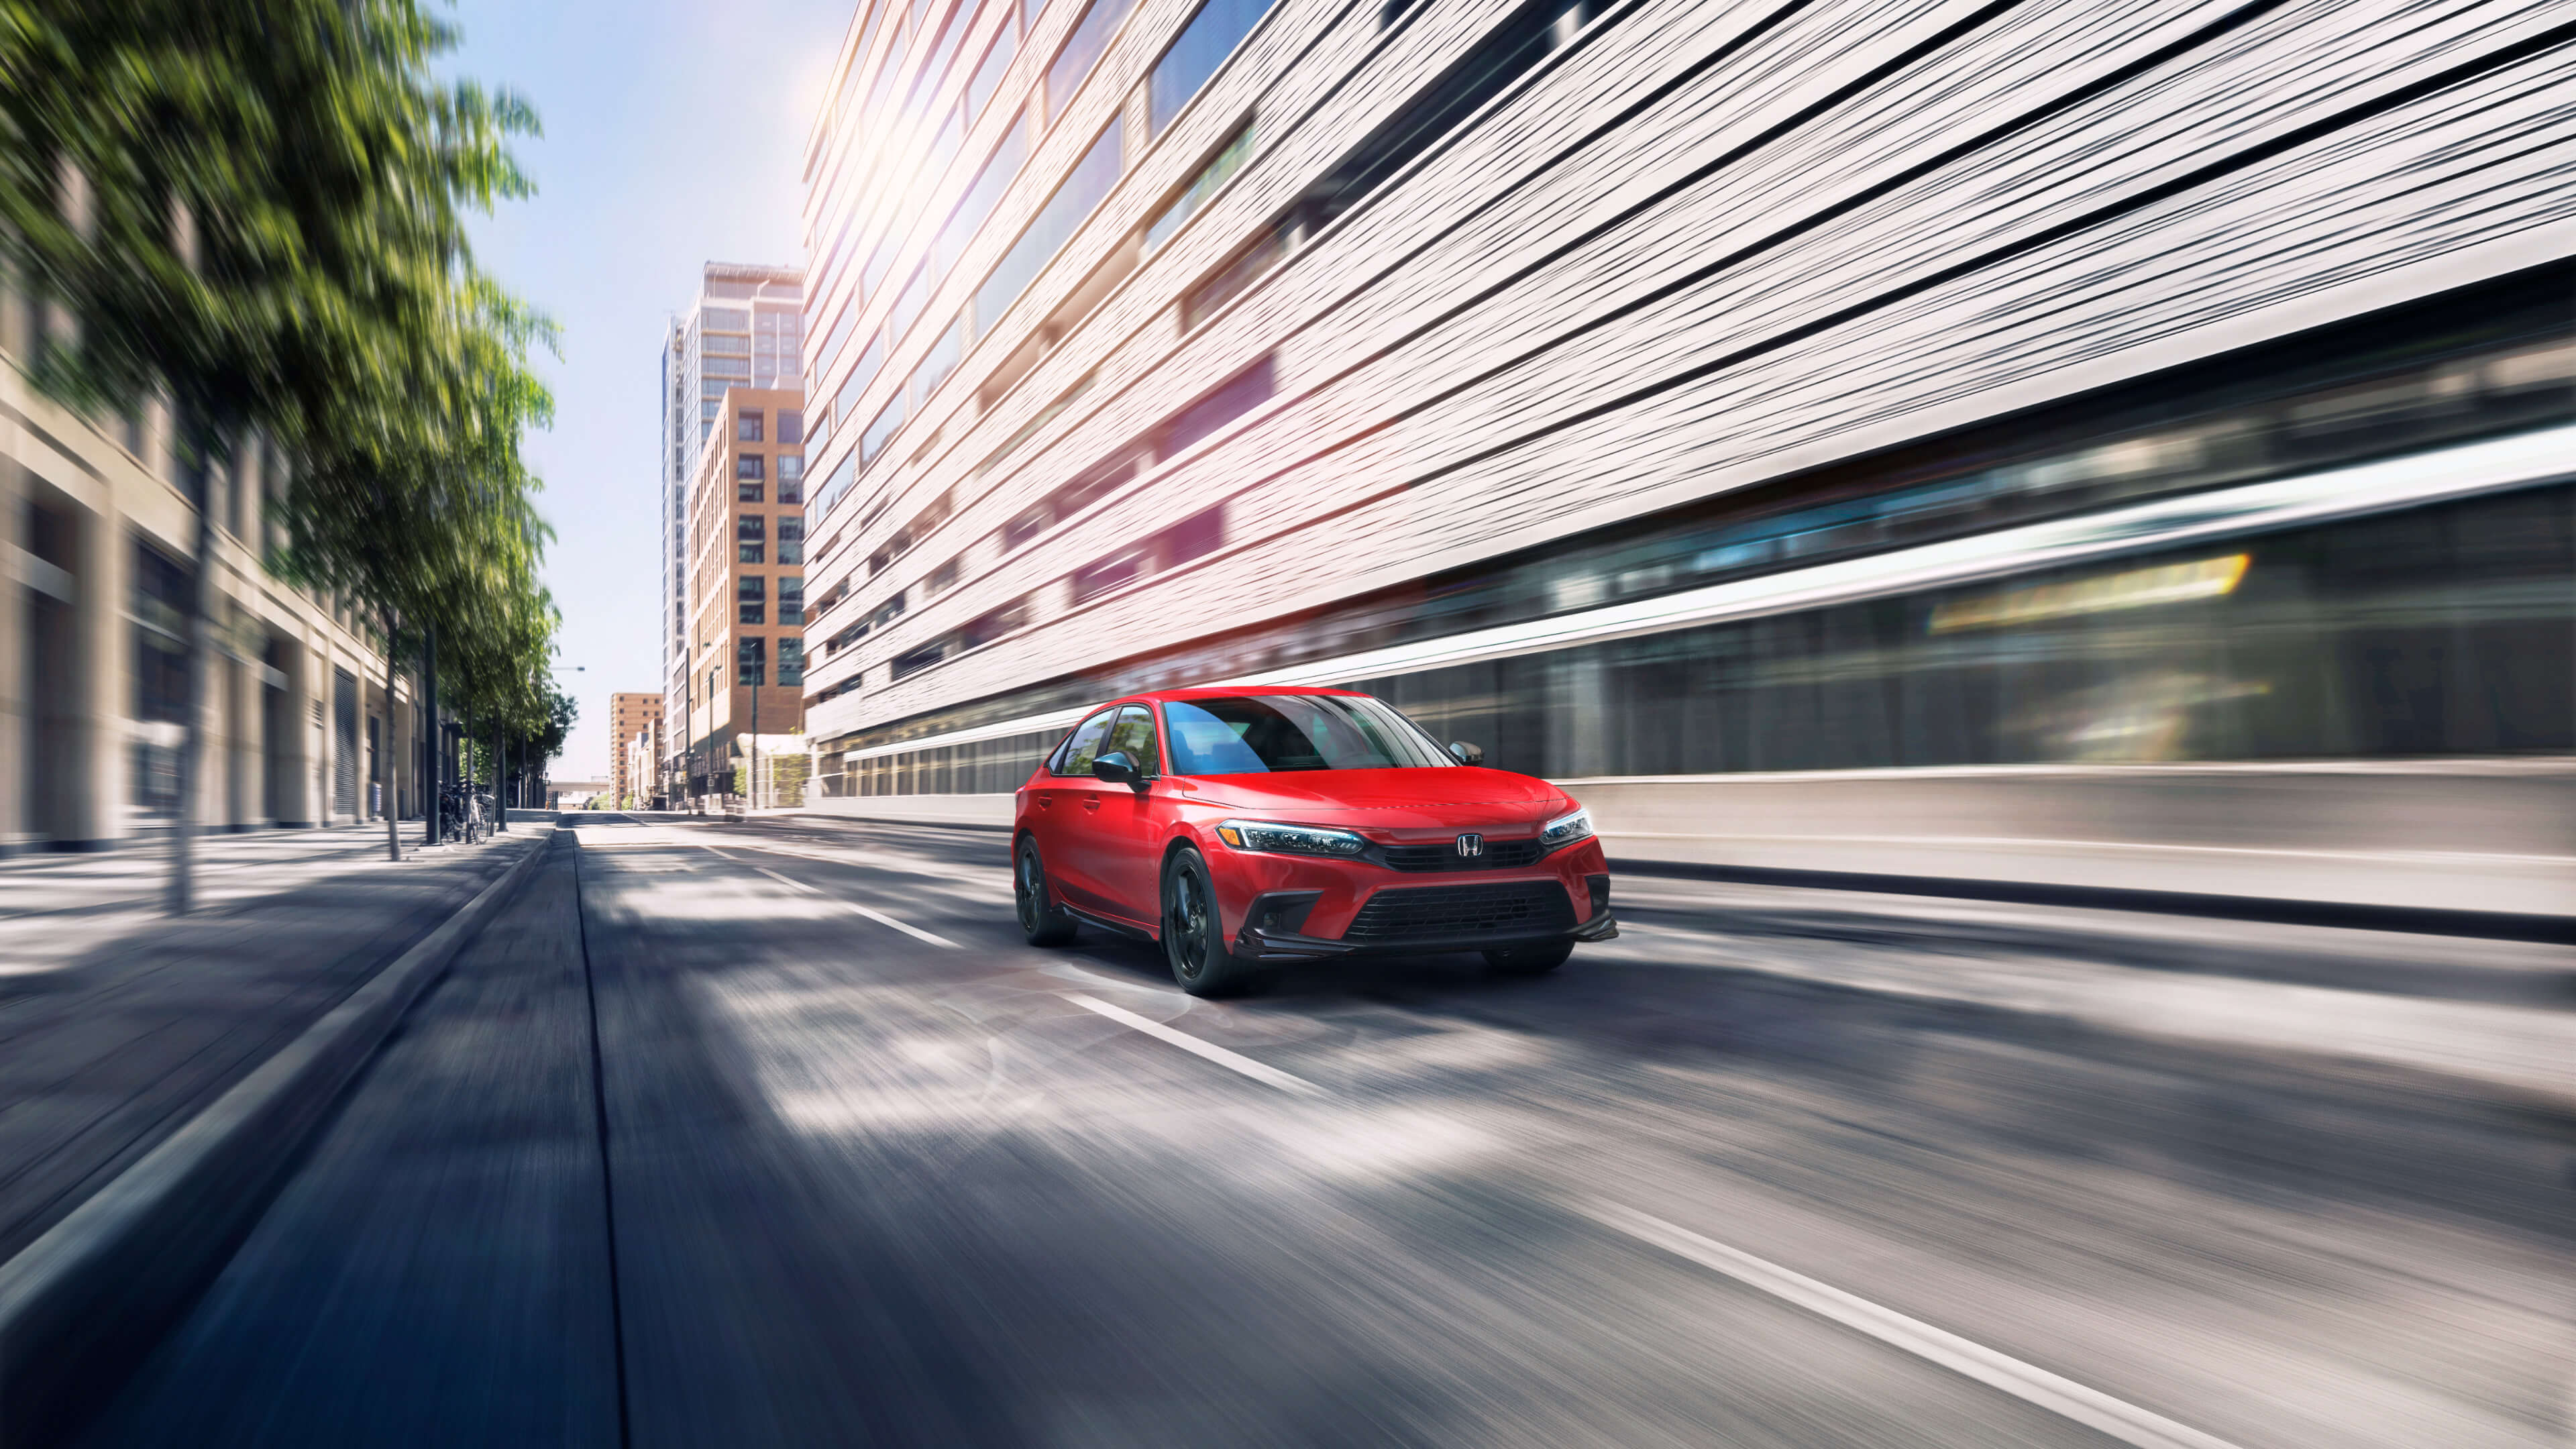 Slightly blurred by motion, front passenger-side, angled view of a red 2022 Honda Civic driving past a city block in the daytime.